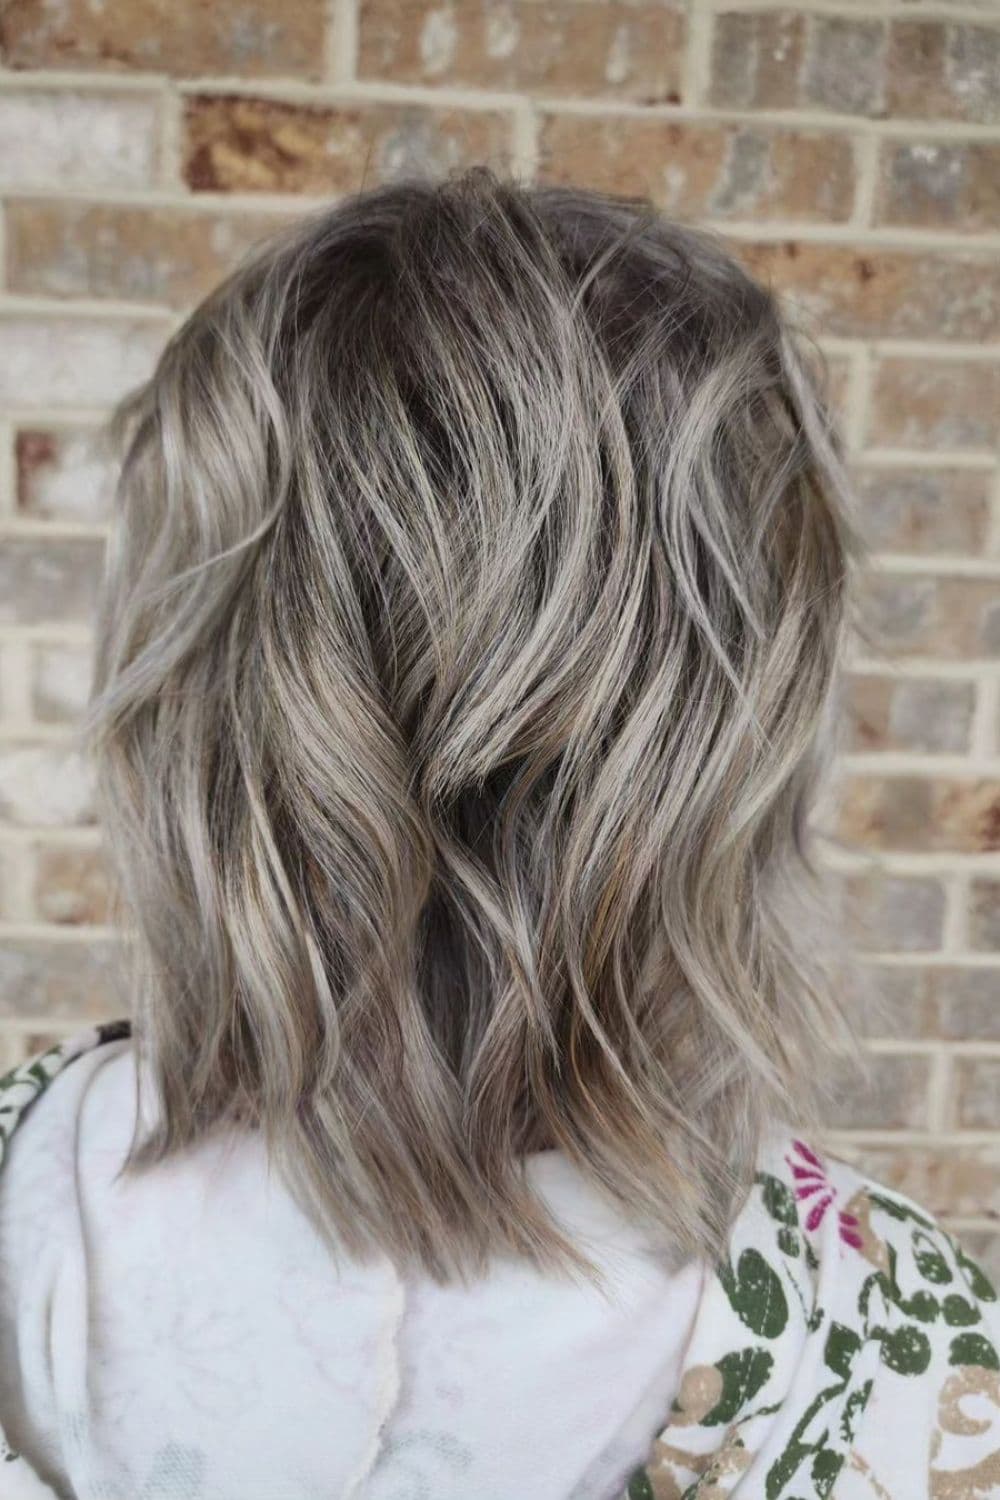 A woman with lob silver highlights with shadow roots.